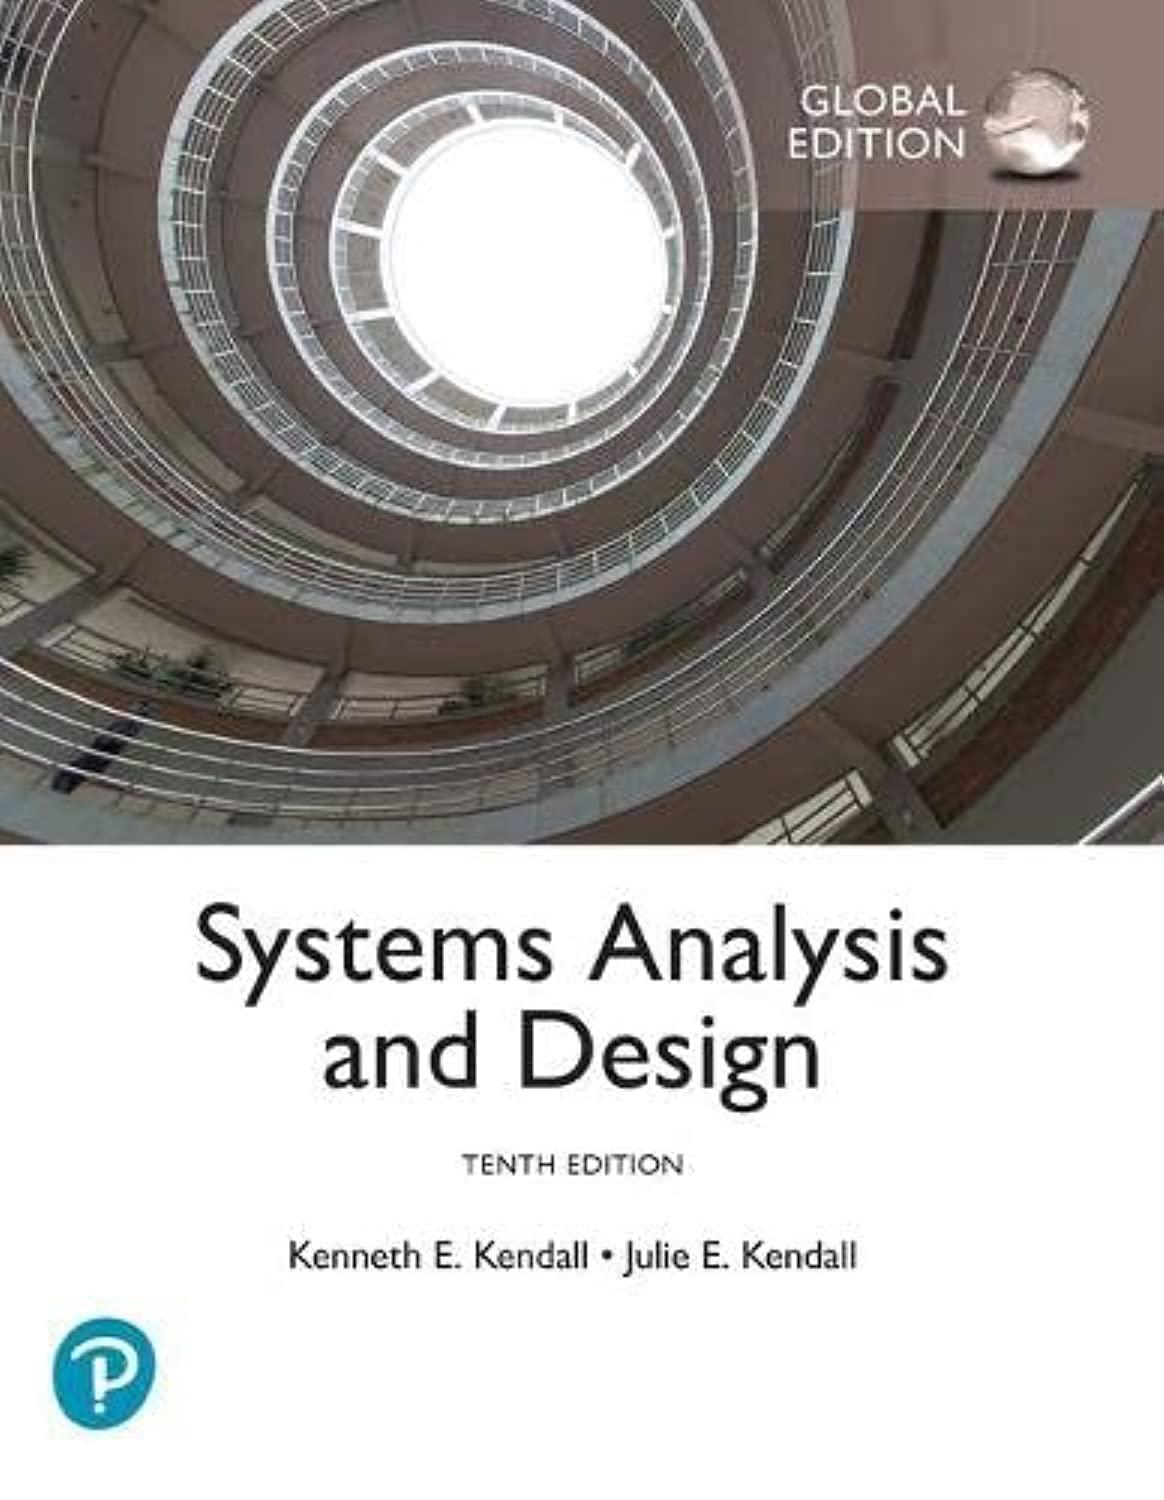 systems analysis and design 10th global edition kenneth kendall, jullie e. kendall 1292281456, 978-1292281452